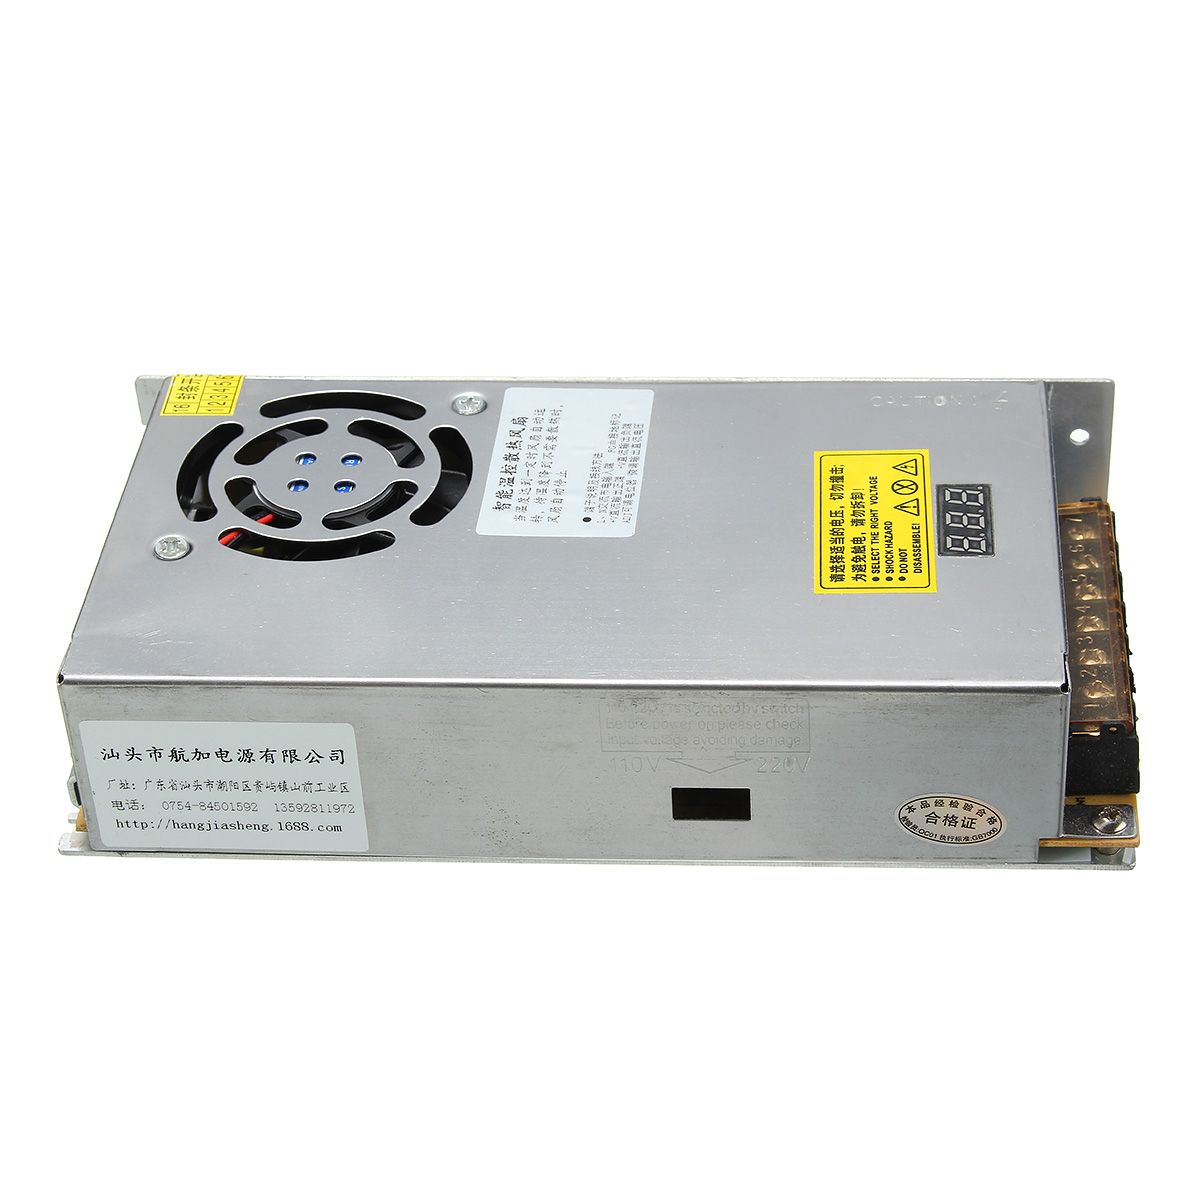 Switching-Power-Supply-Transformer-Adjustable-AC-220V-to-DC-0-5V-40A-240W-with-LCD-Display-1424723